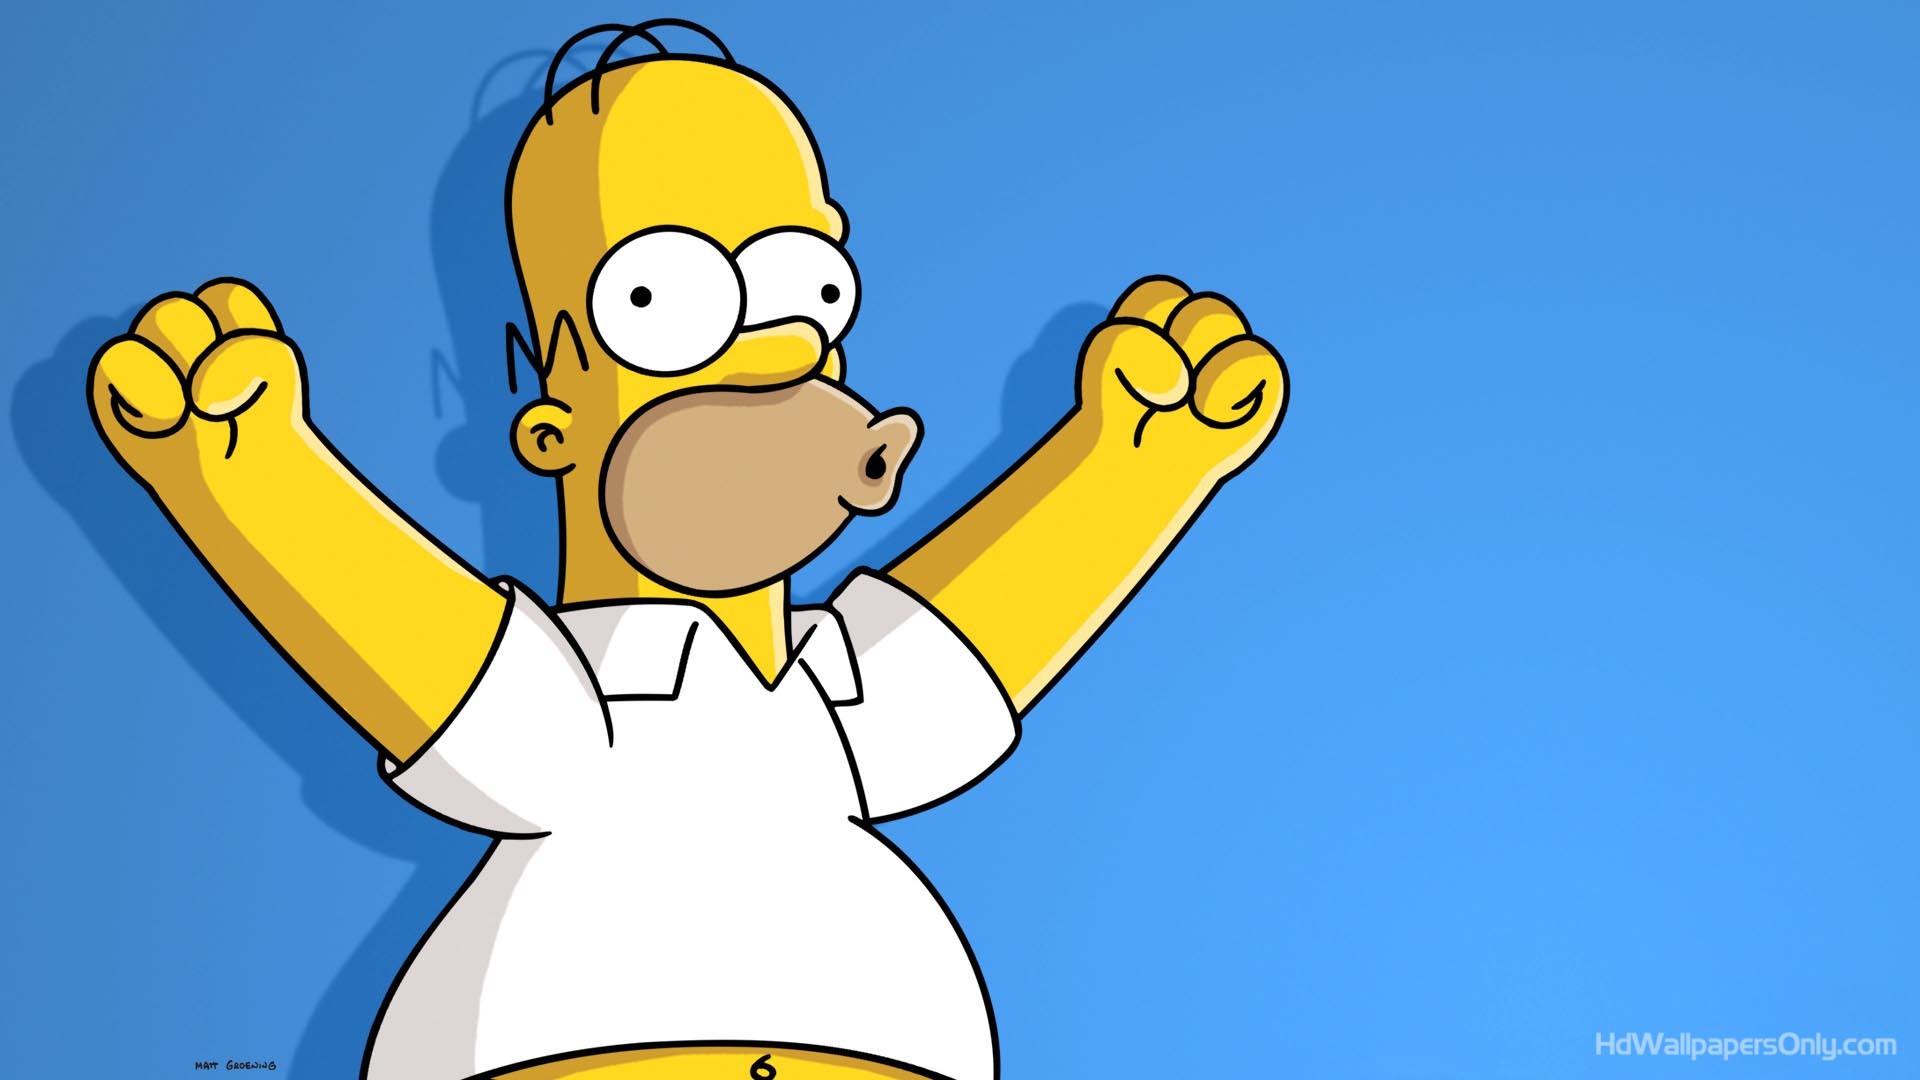 1920x1080 The Simpsons HD Wallpapers for desktop download